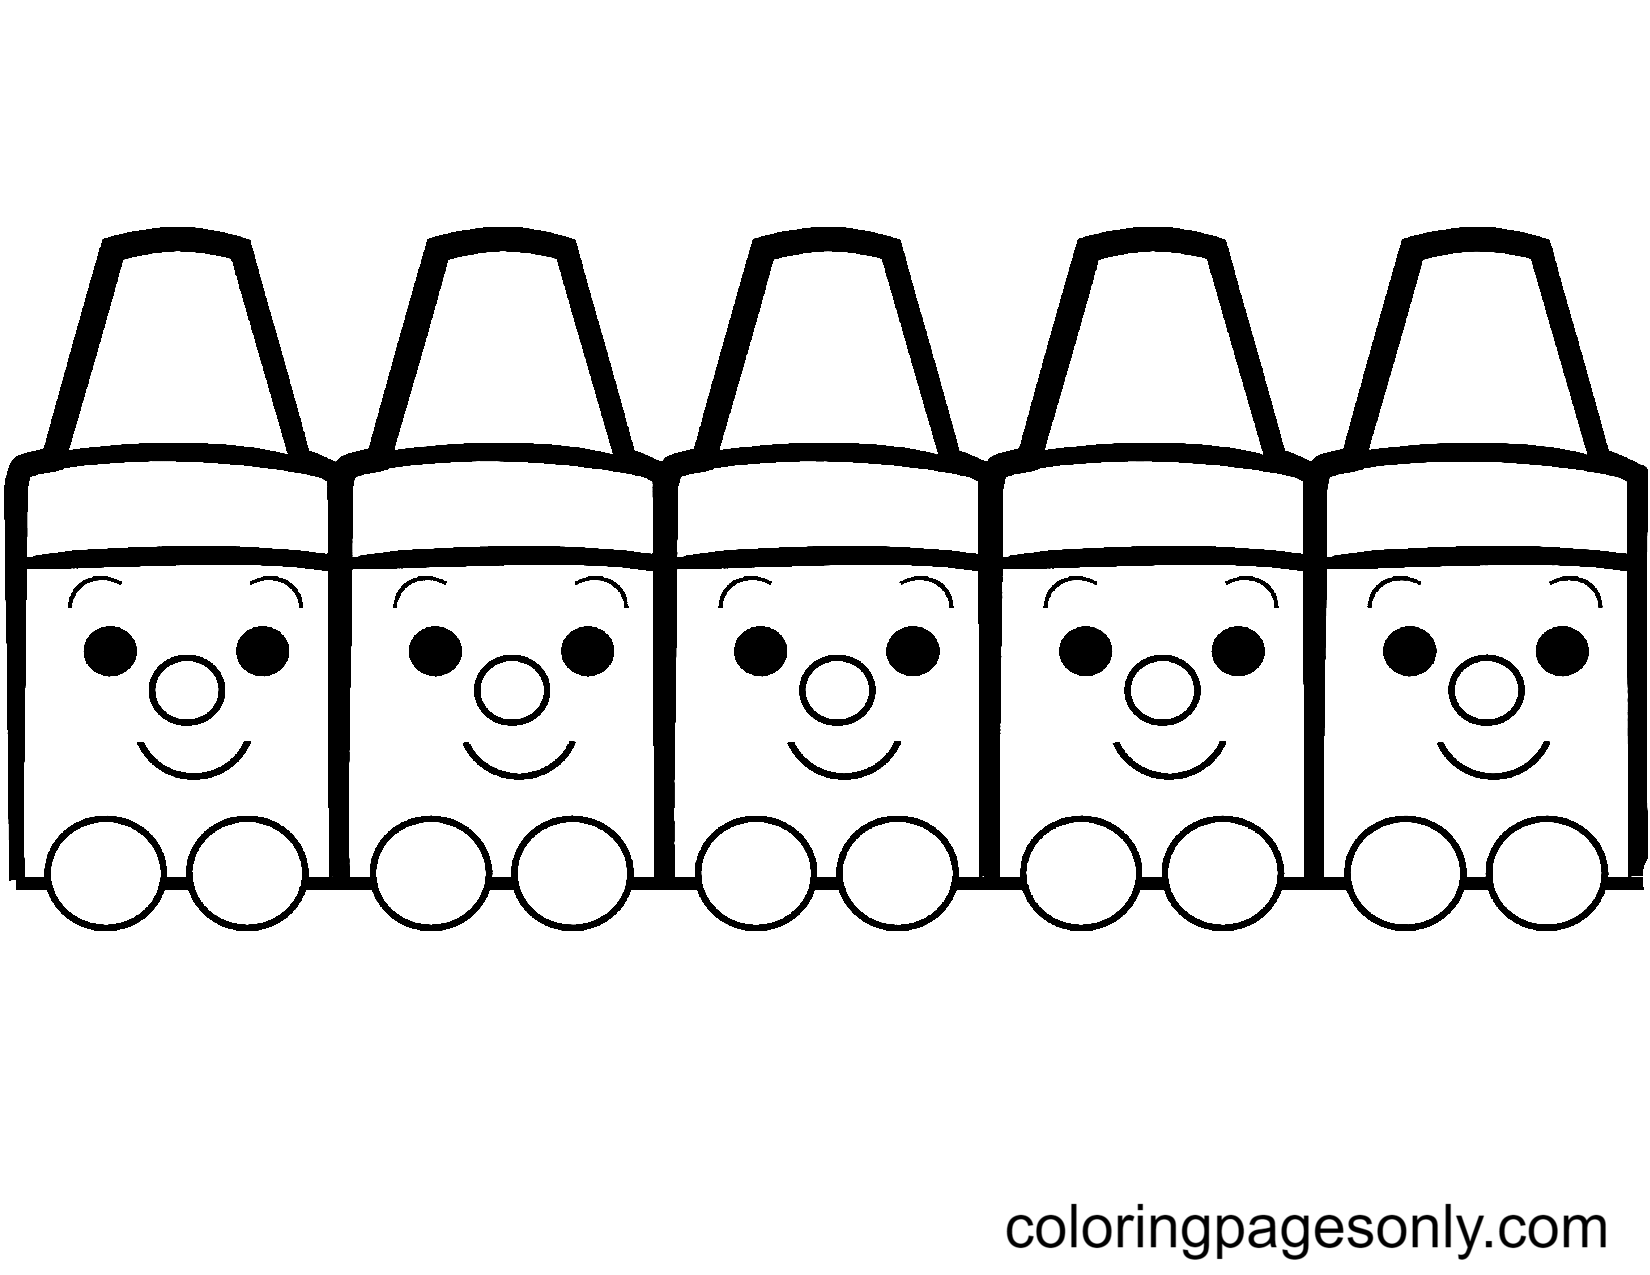 Cute Crayons Coloring Pages